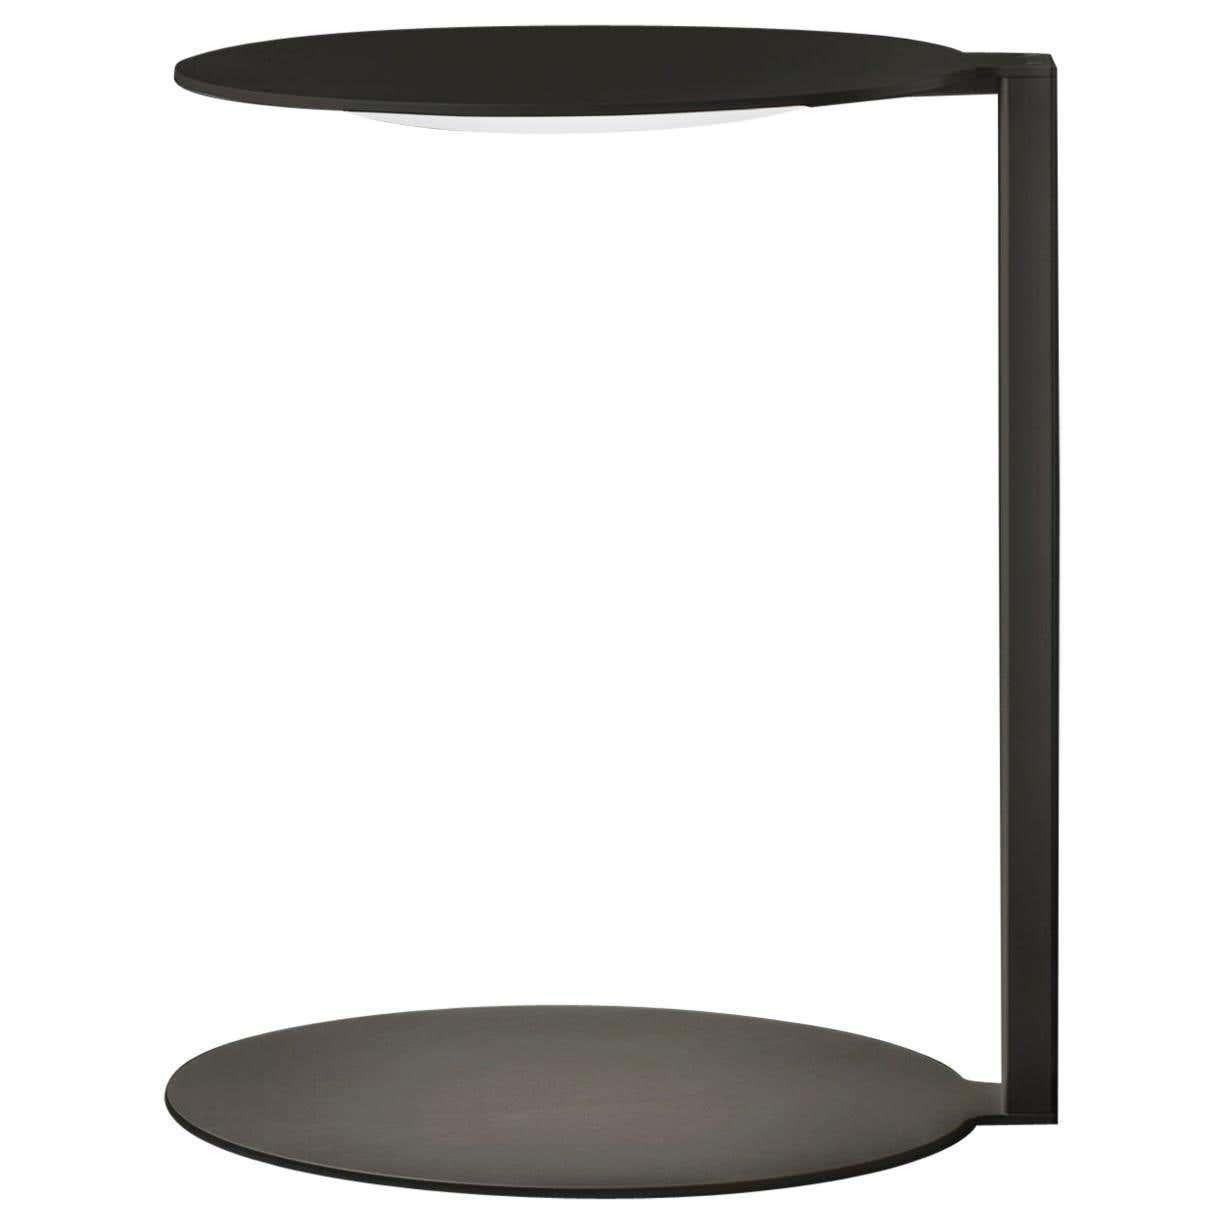 Nicola Gallizia Table Lamp 'Duca' Warm Grey Metal by Oluce In New Condition For Sale In Barcelona, Barcelona